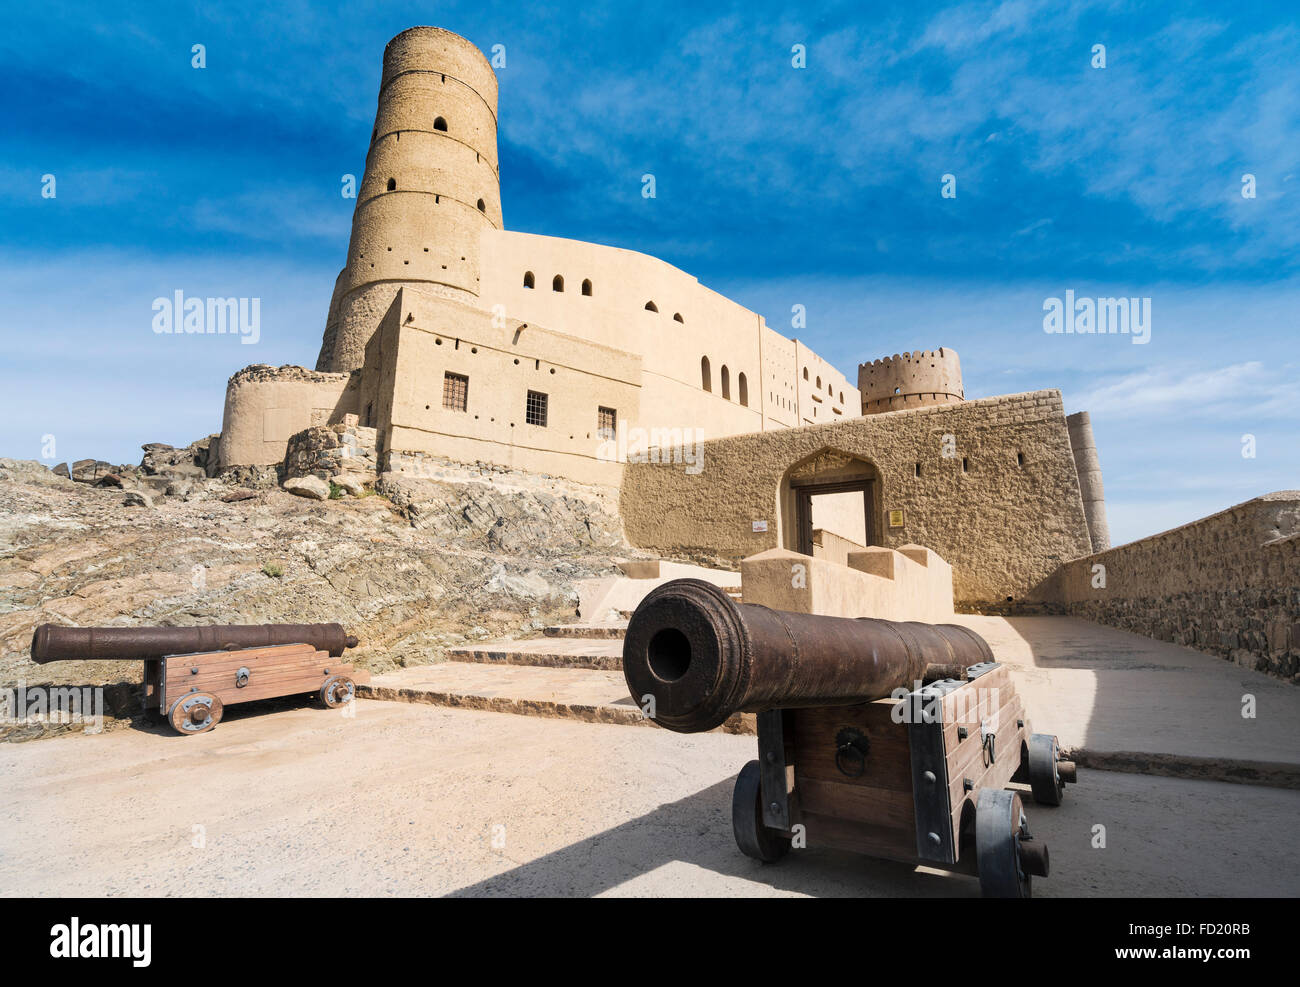 Exterior view of Bahla Fort in Oman Stock Photo